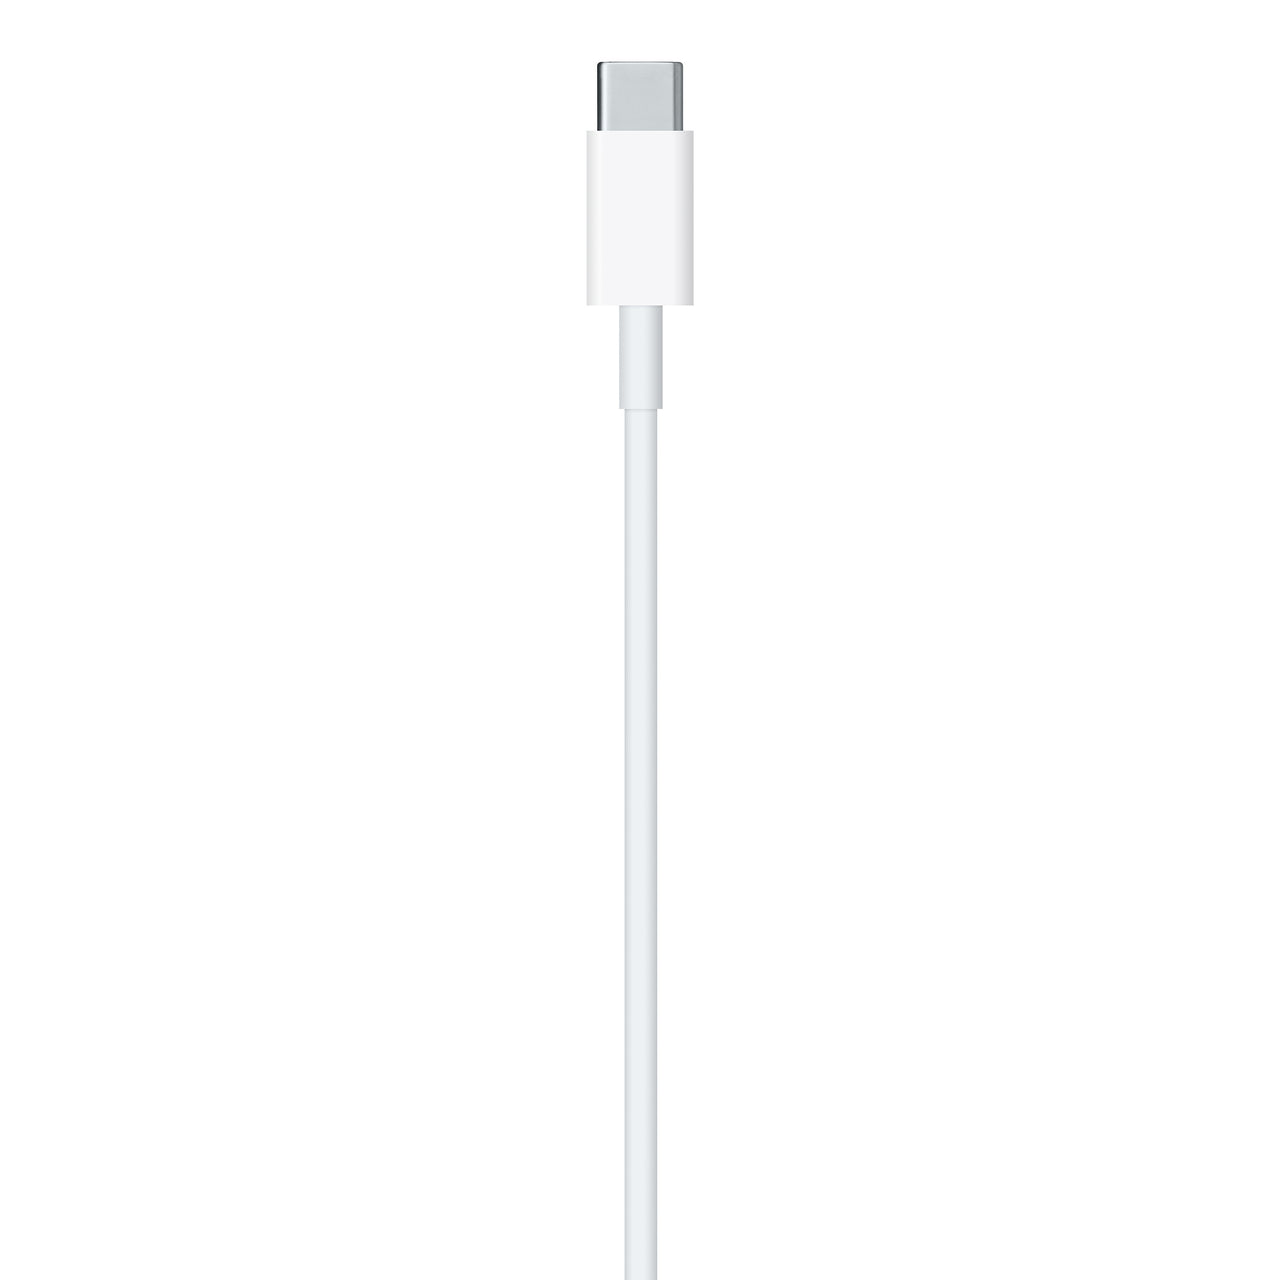 Apple USB-C to Lightning Cable 2m - White